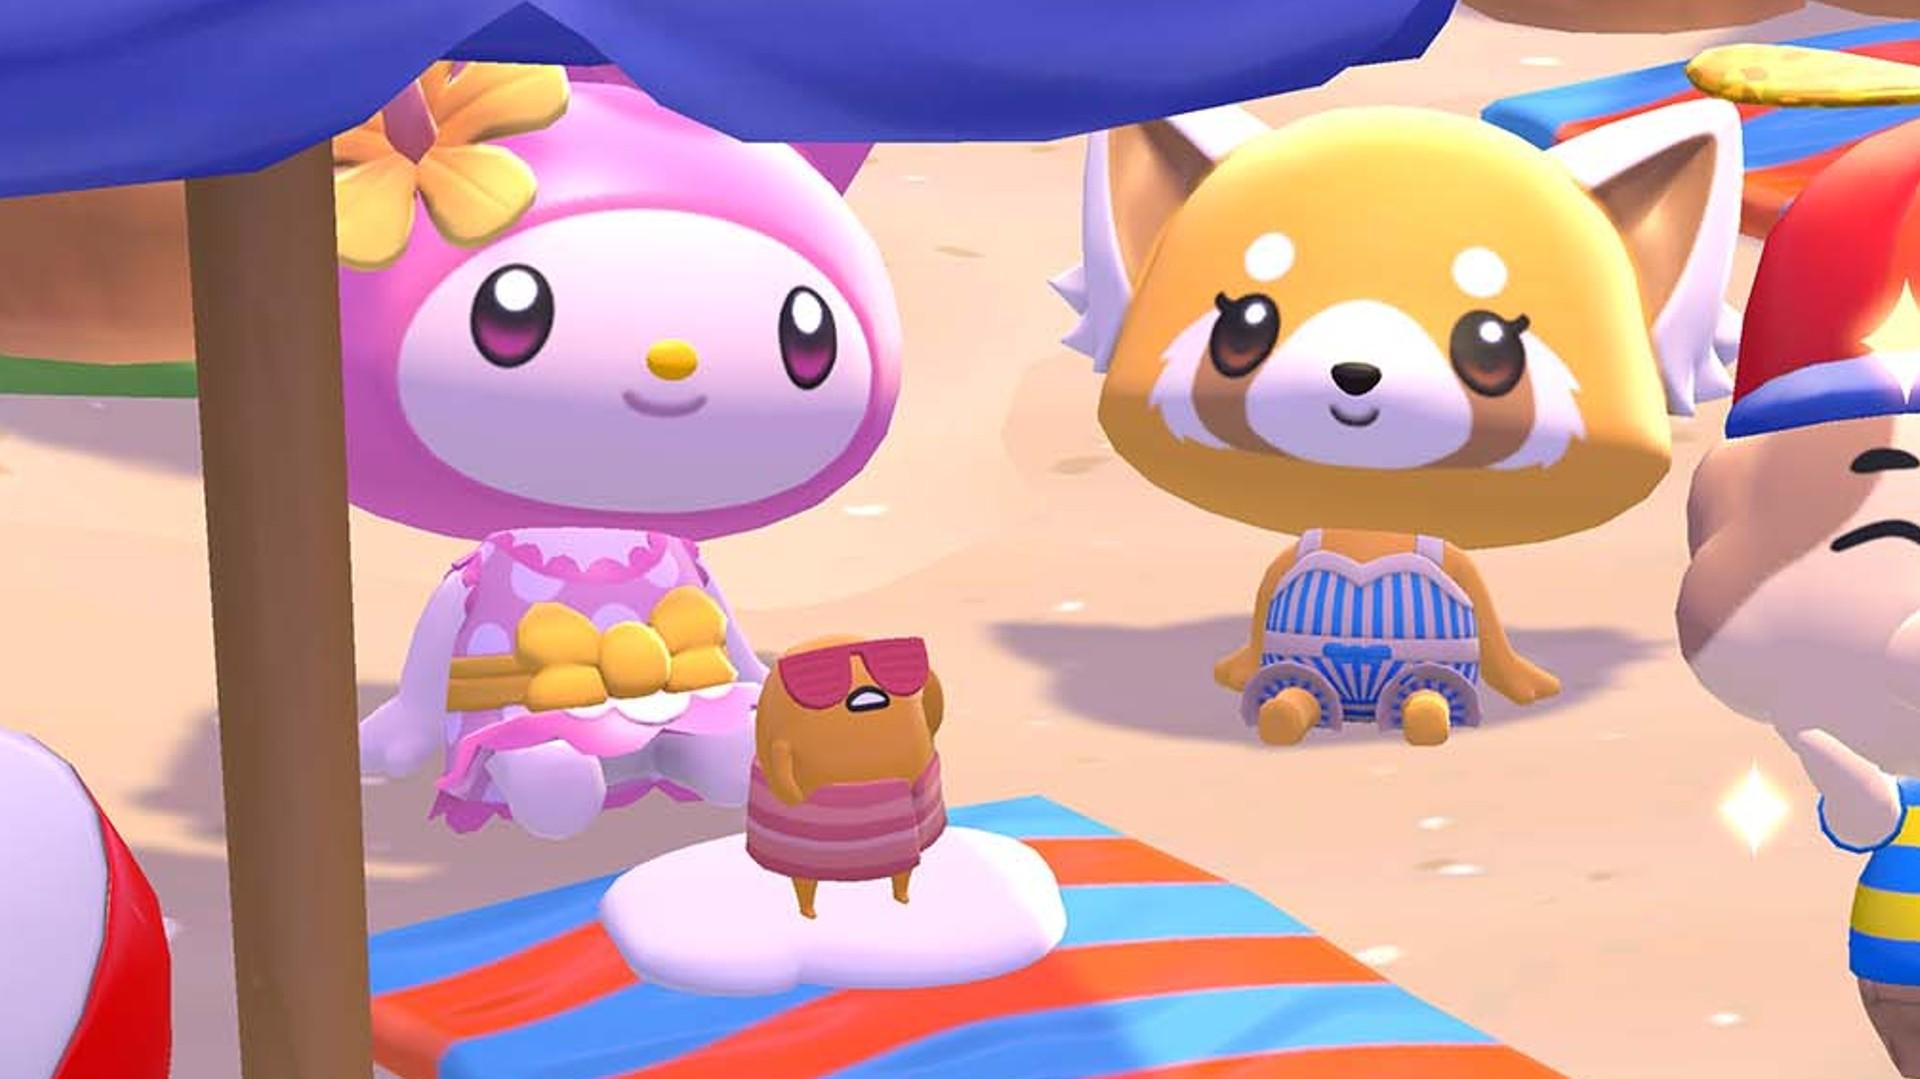 I Was Already Excited About This Hello Kitty Animal Crossing Game